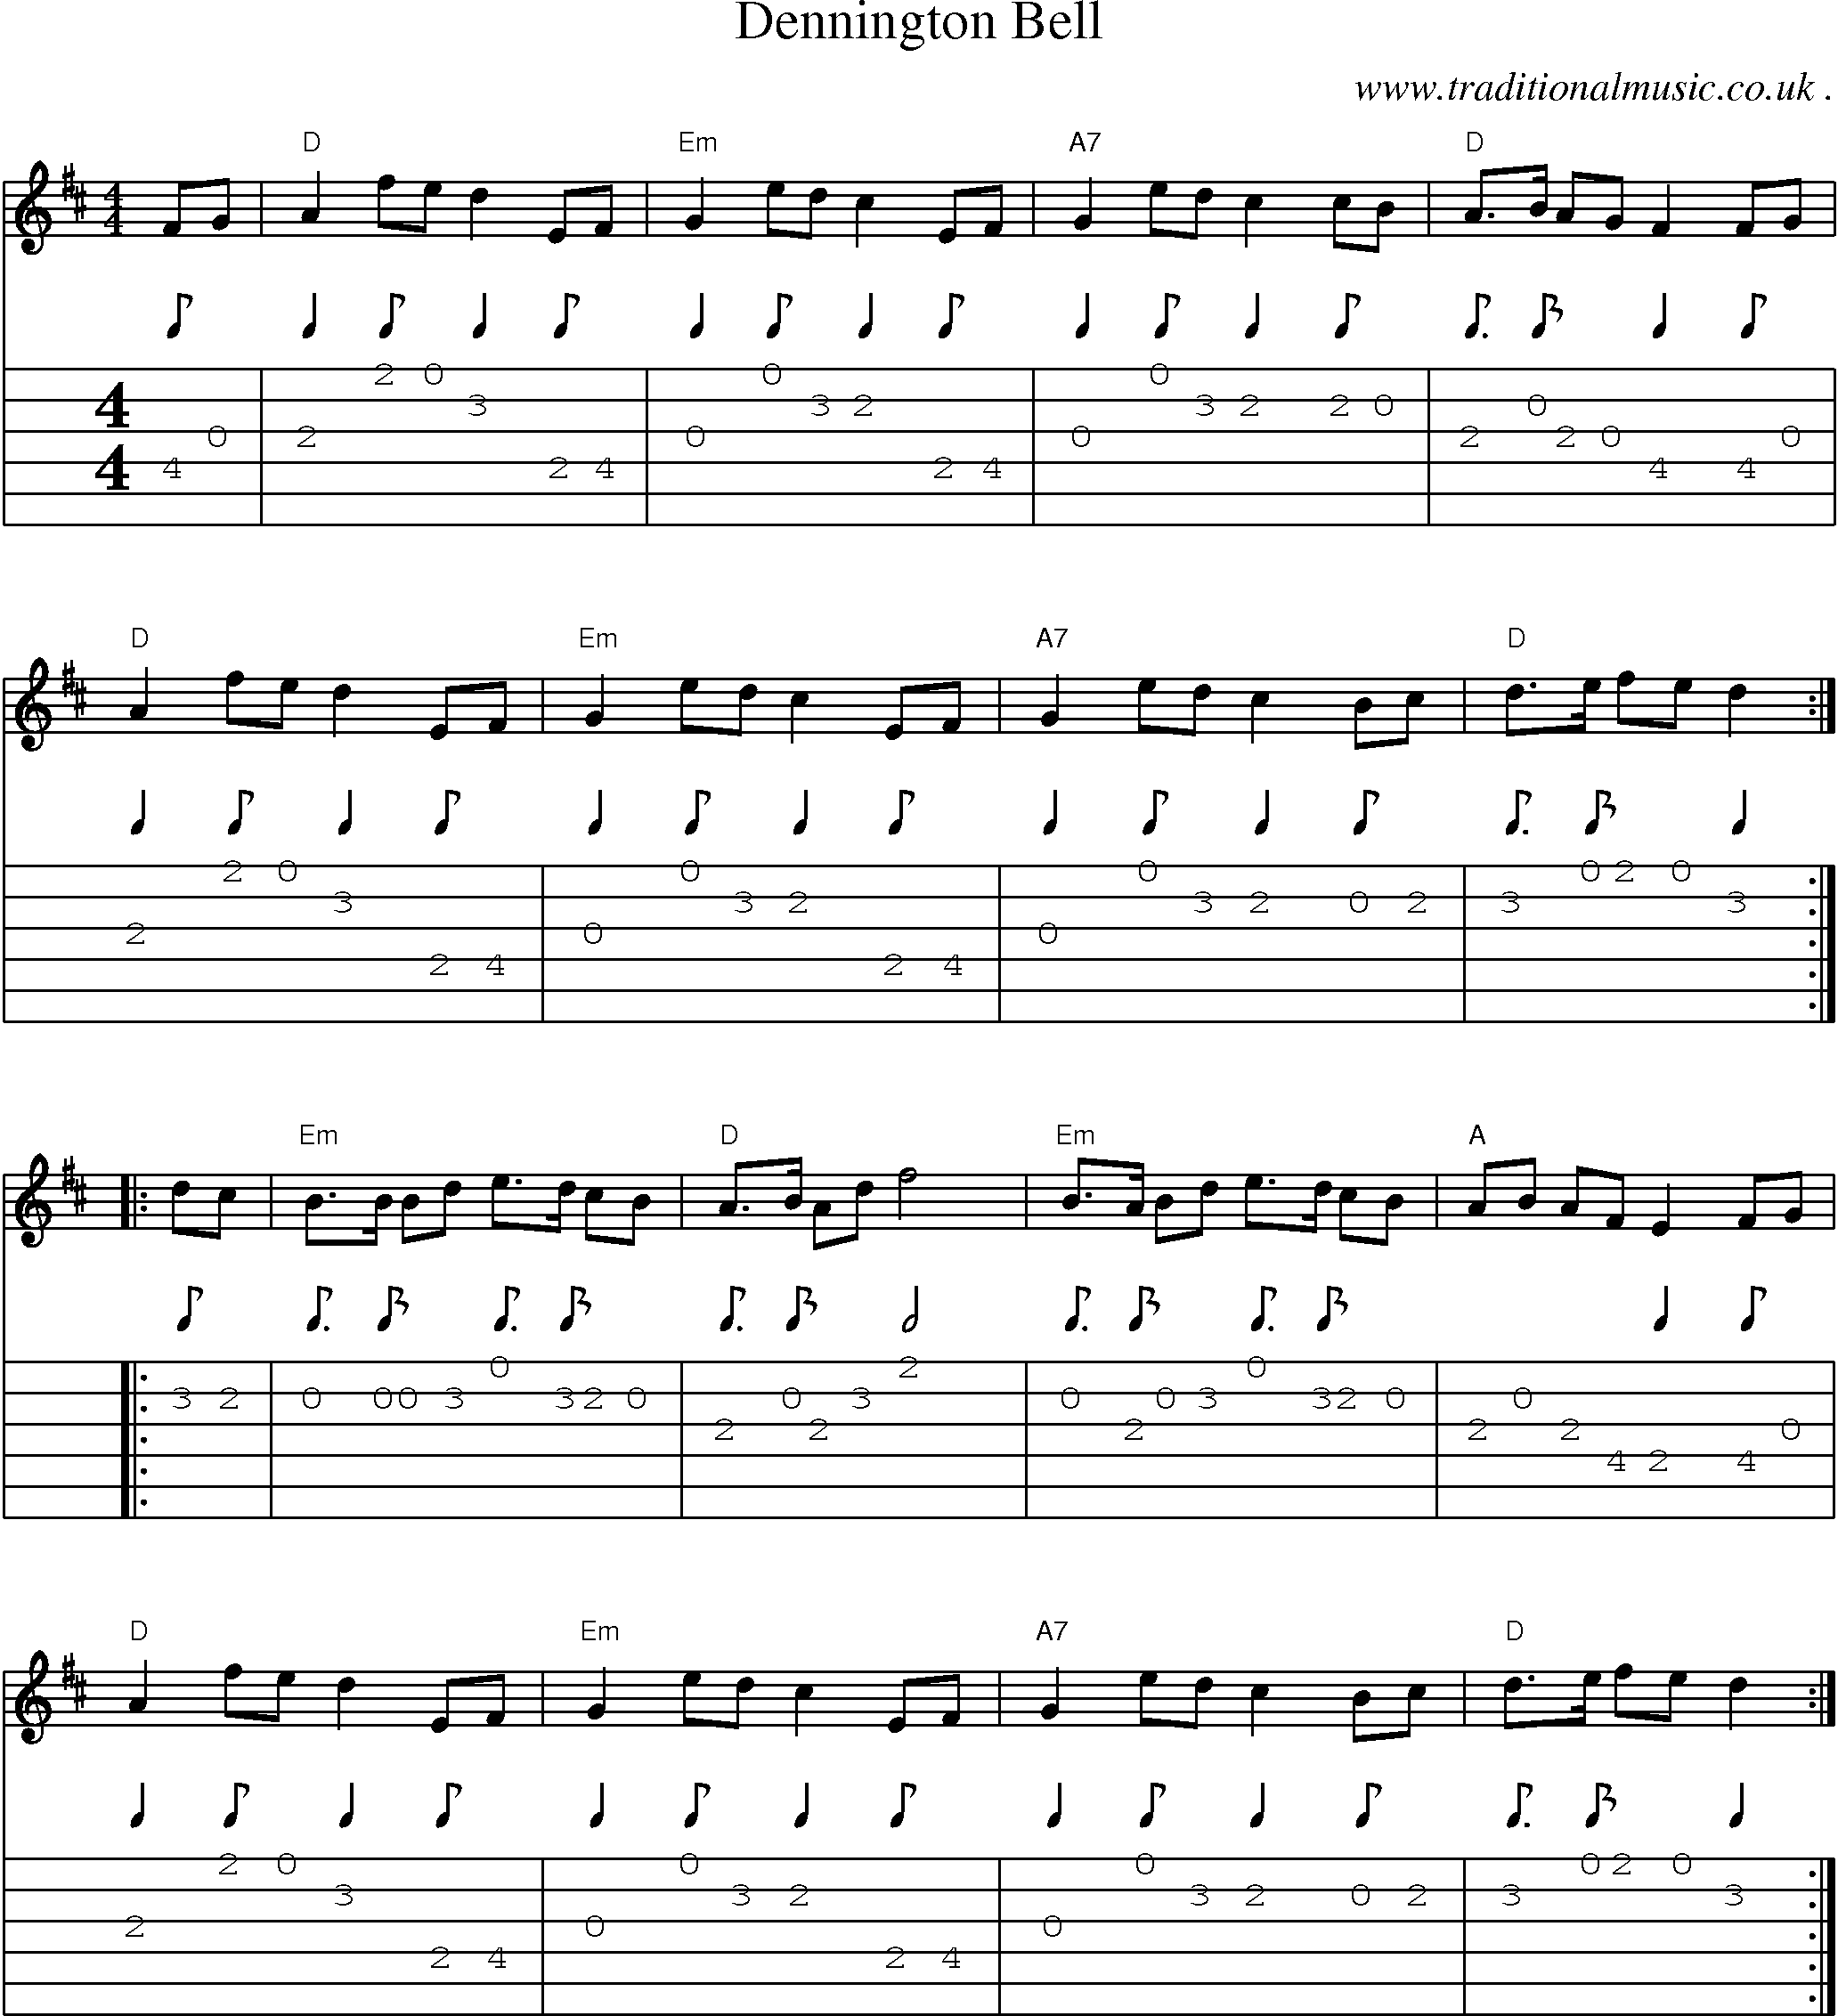 Music Score and Guitar Tabs for Dennington Bell